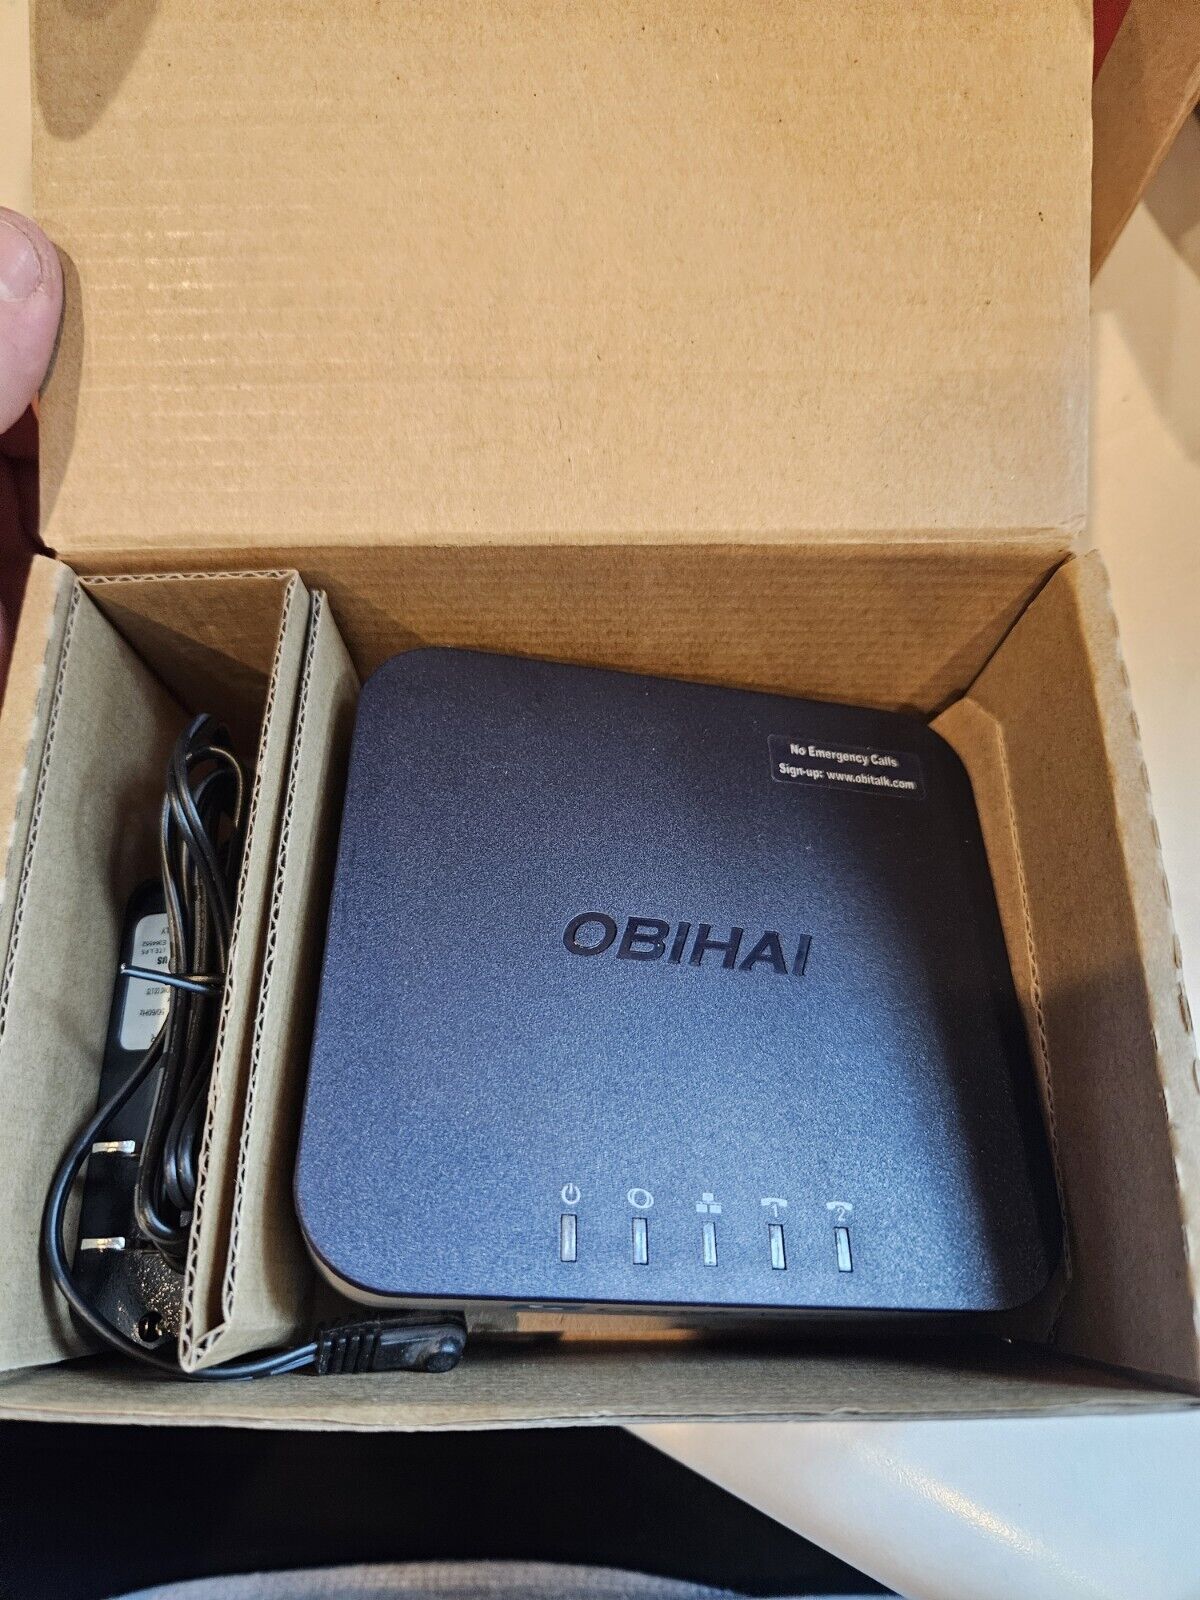 OBIHAI OBI202 2 PORT VoIP Google Voice With Charger